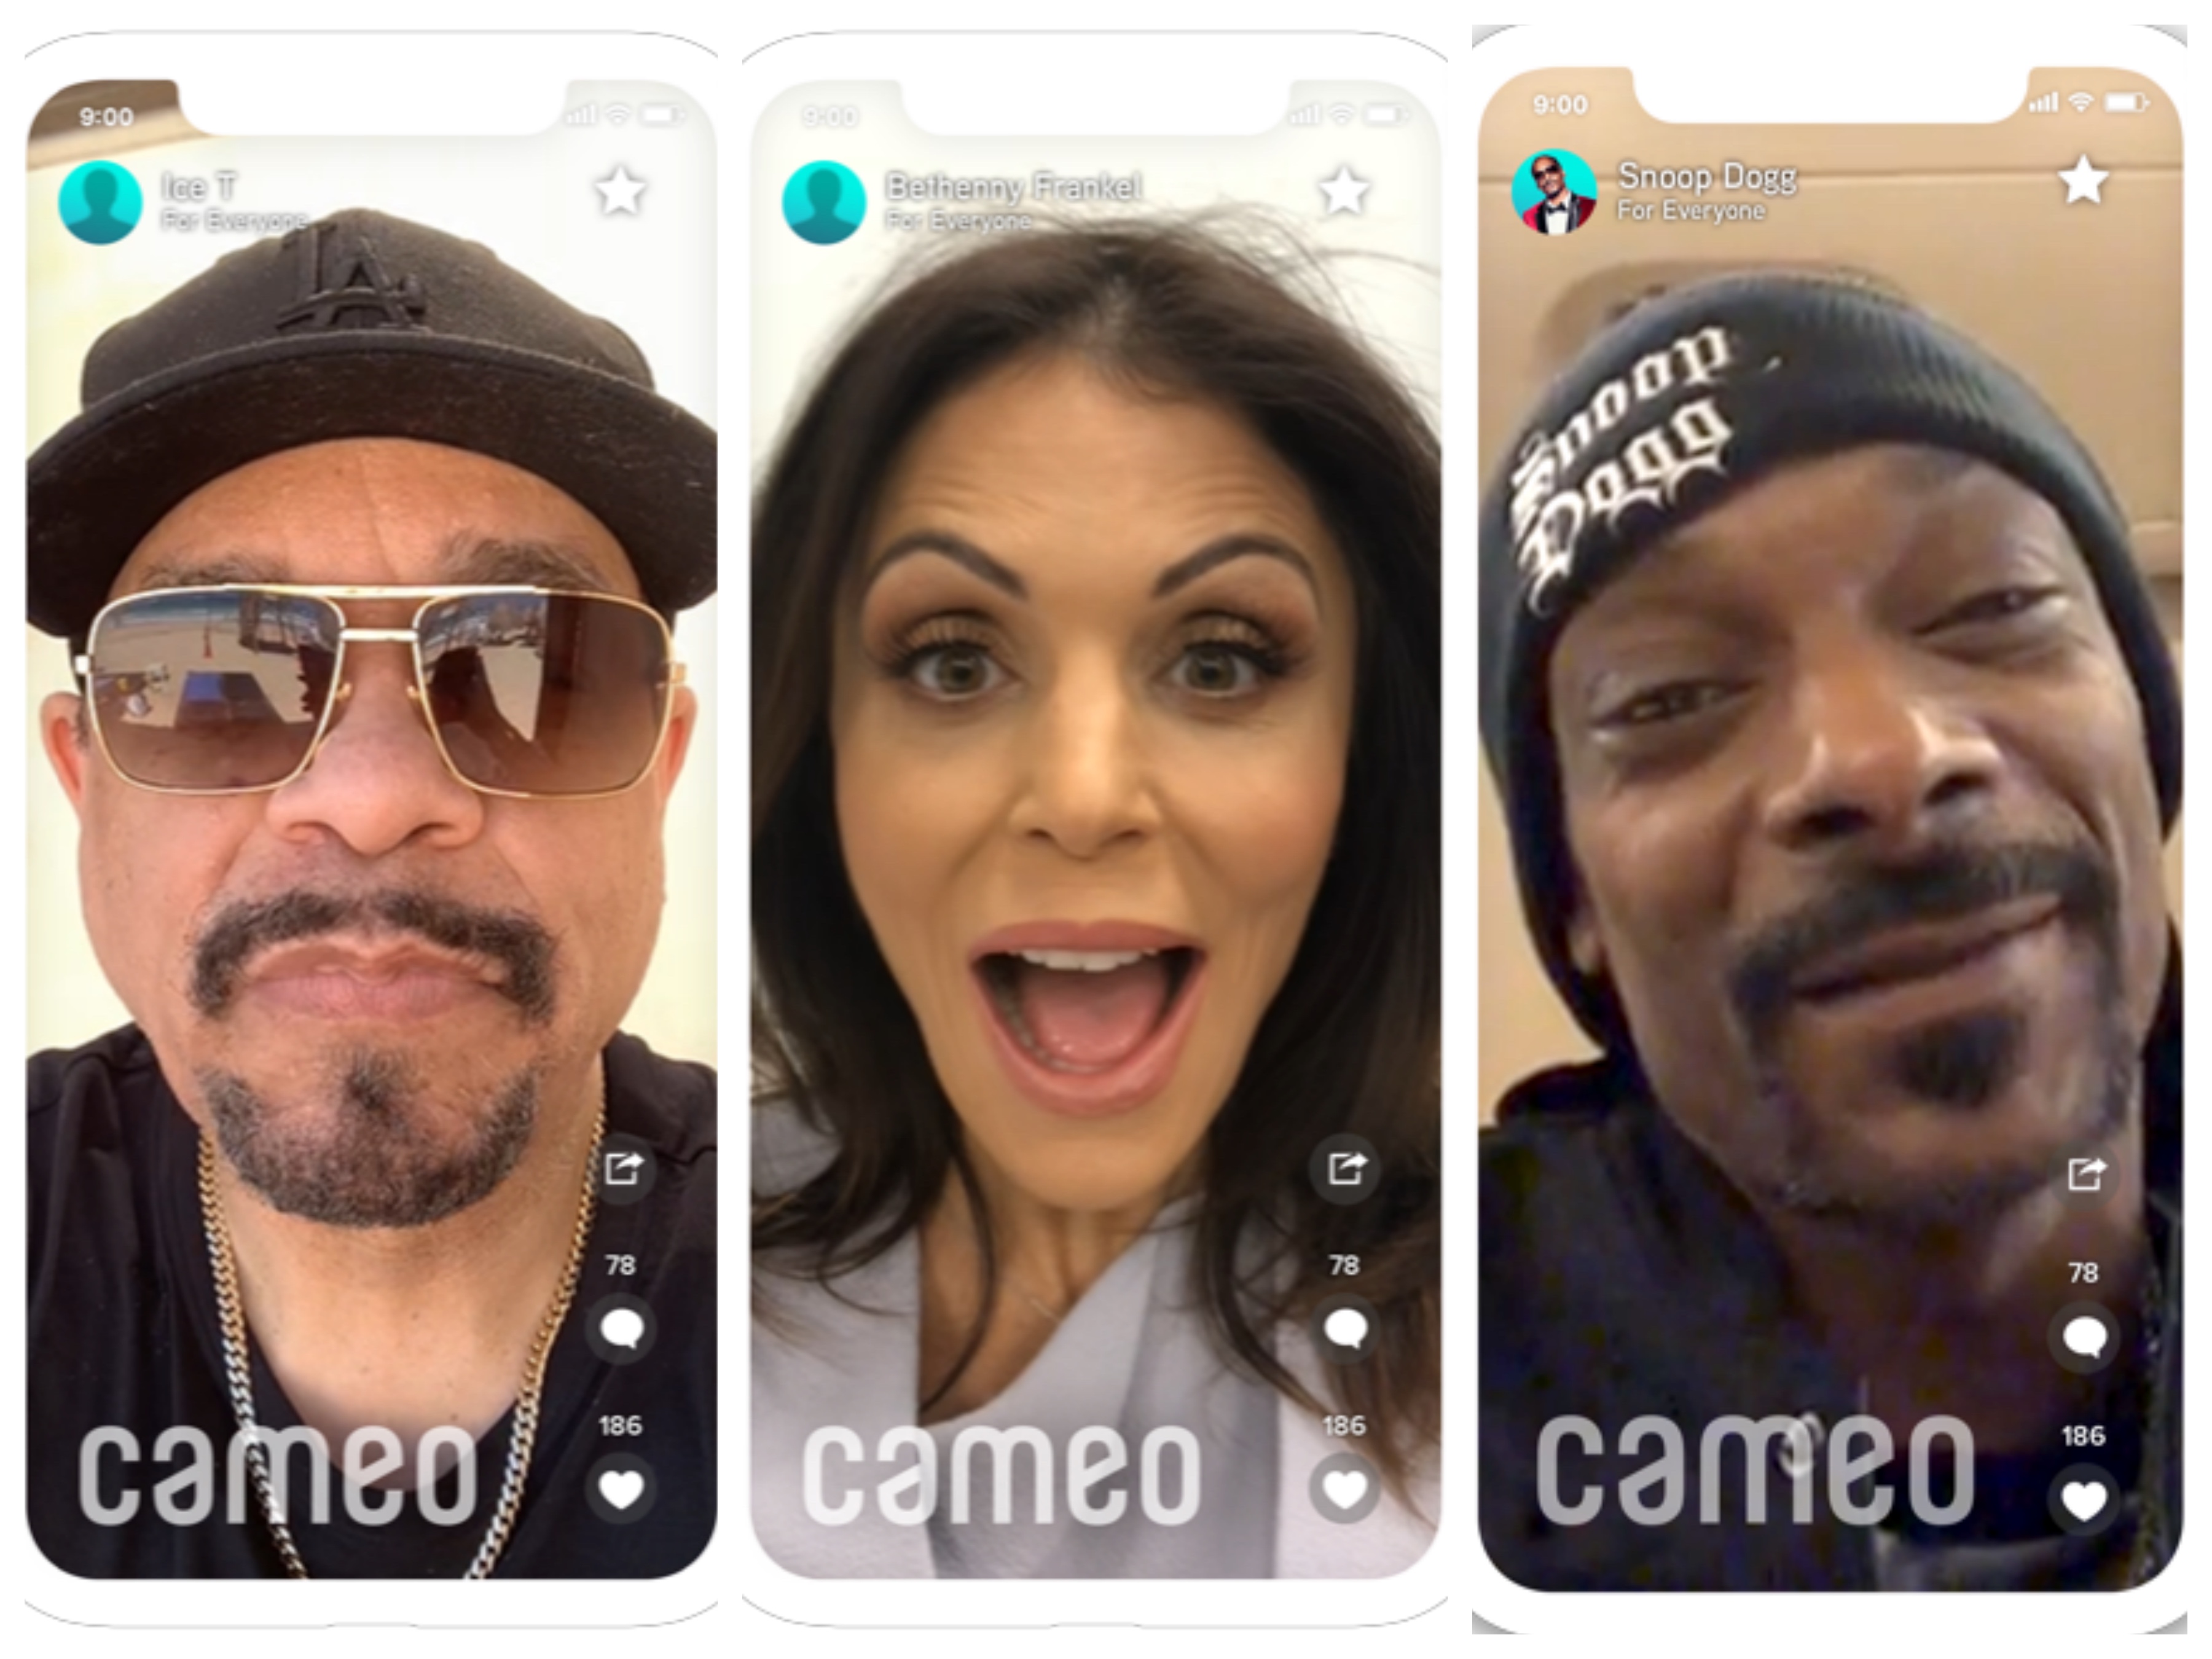 Cameo raises $50M to deliver personalized messages from celebrities & influencers | TechCrunch